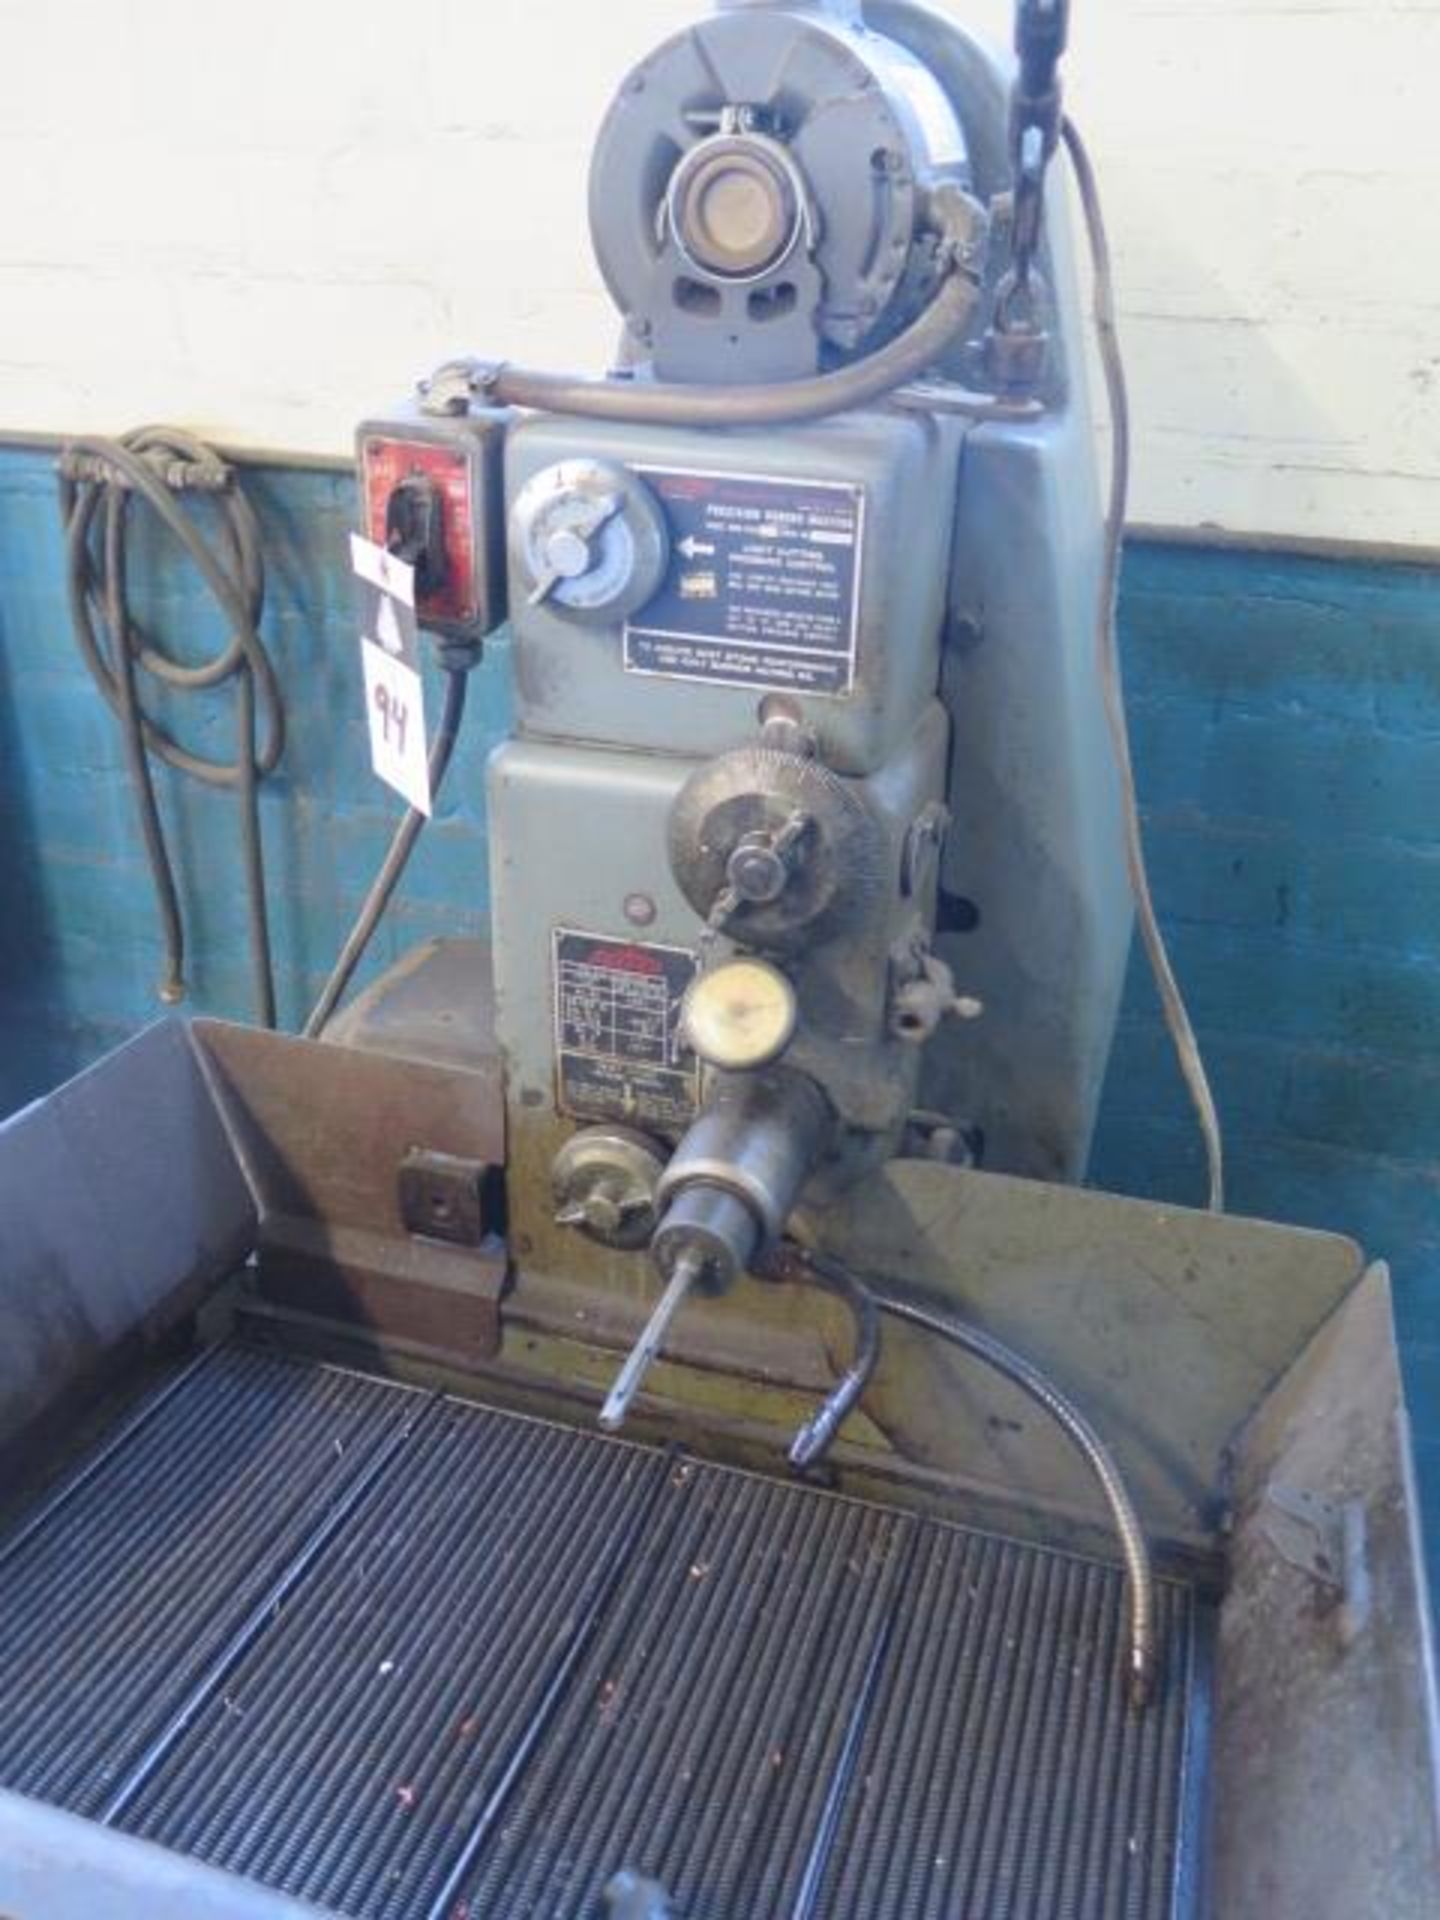 Sunnen MBB-1600 Precision Honing Machine s/n 43802 w/ Coolant (SOLD AS-IS - NO WARRANTY) - Image 3 of 8